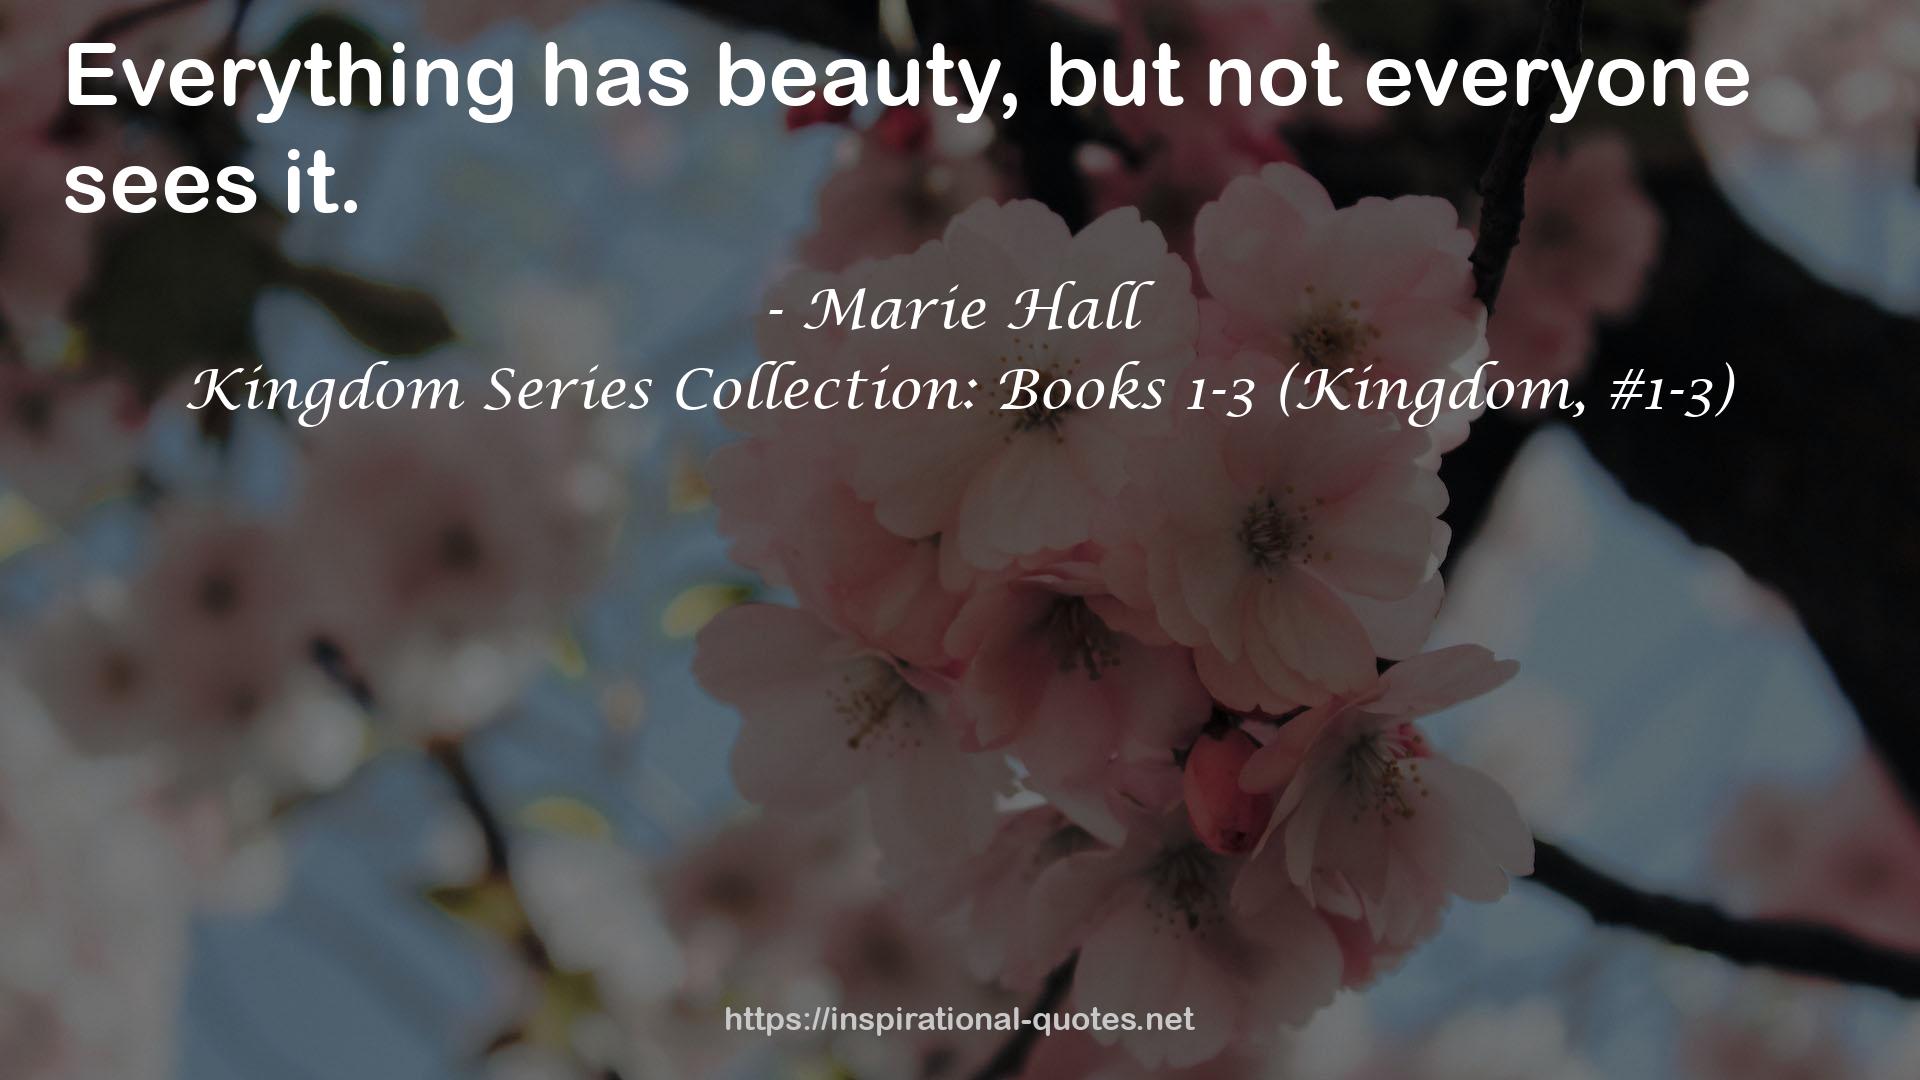 Marie Hall QUOTES